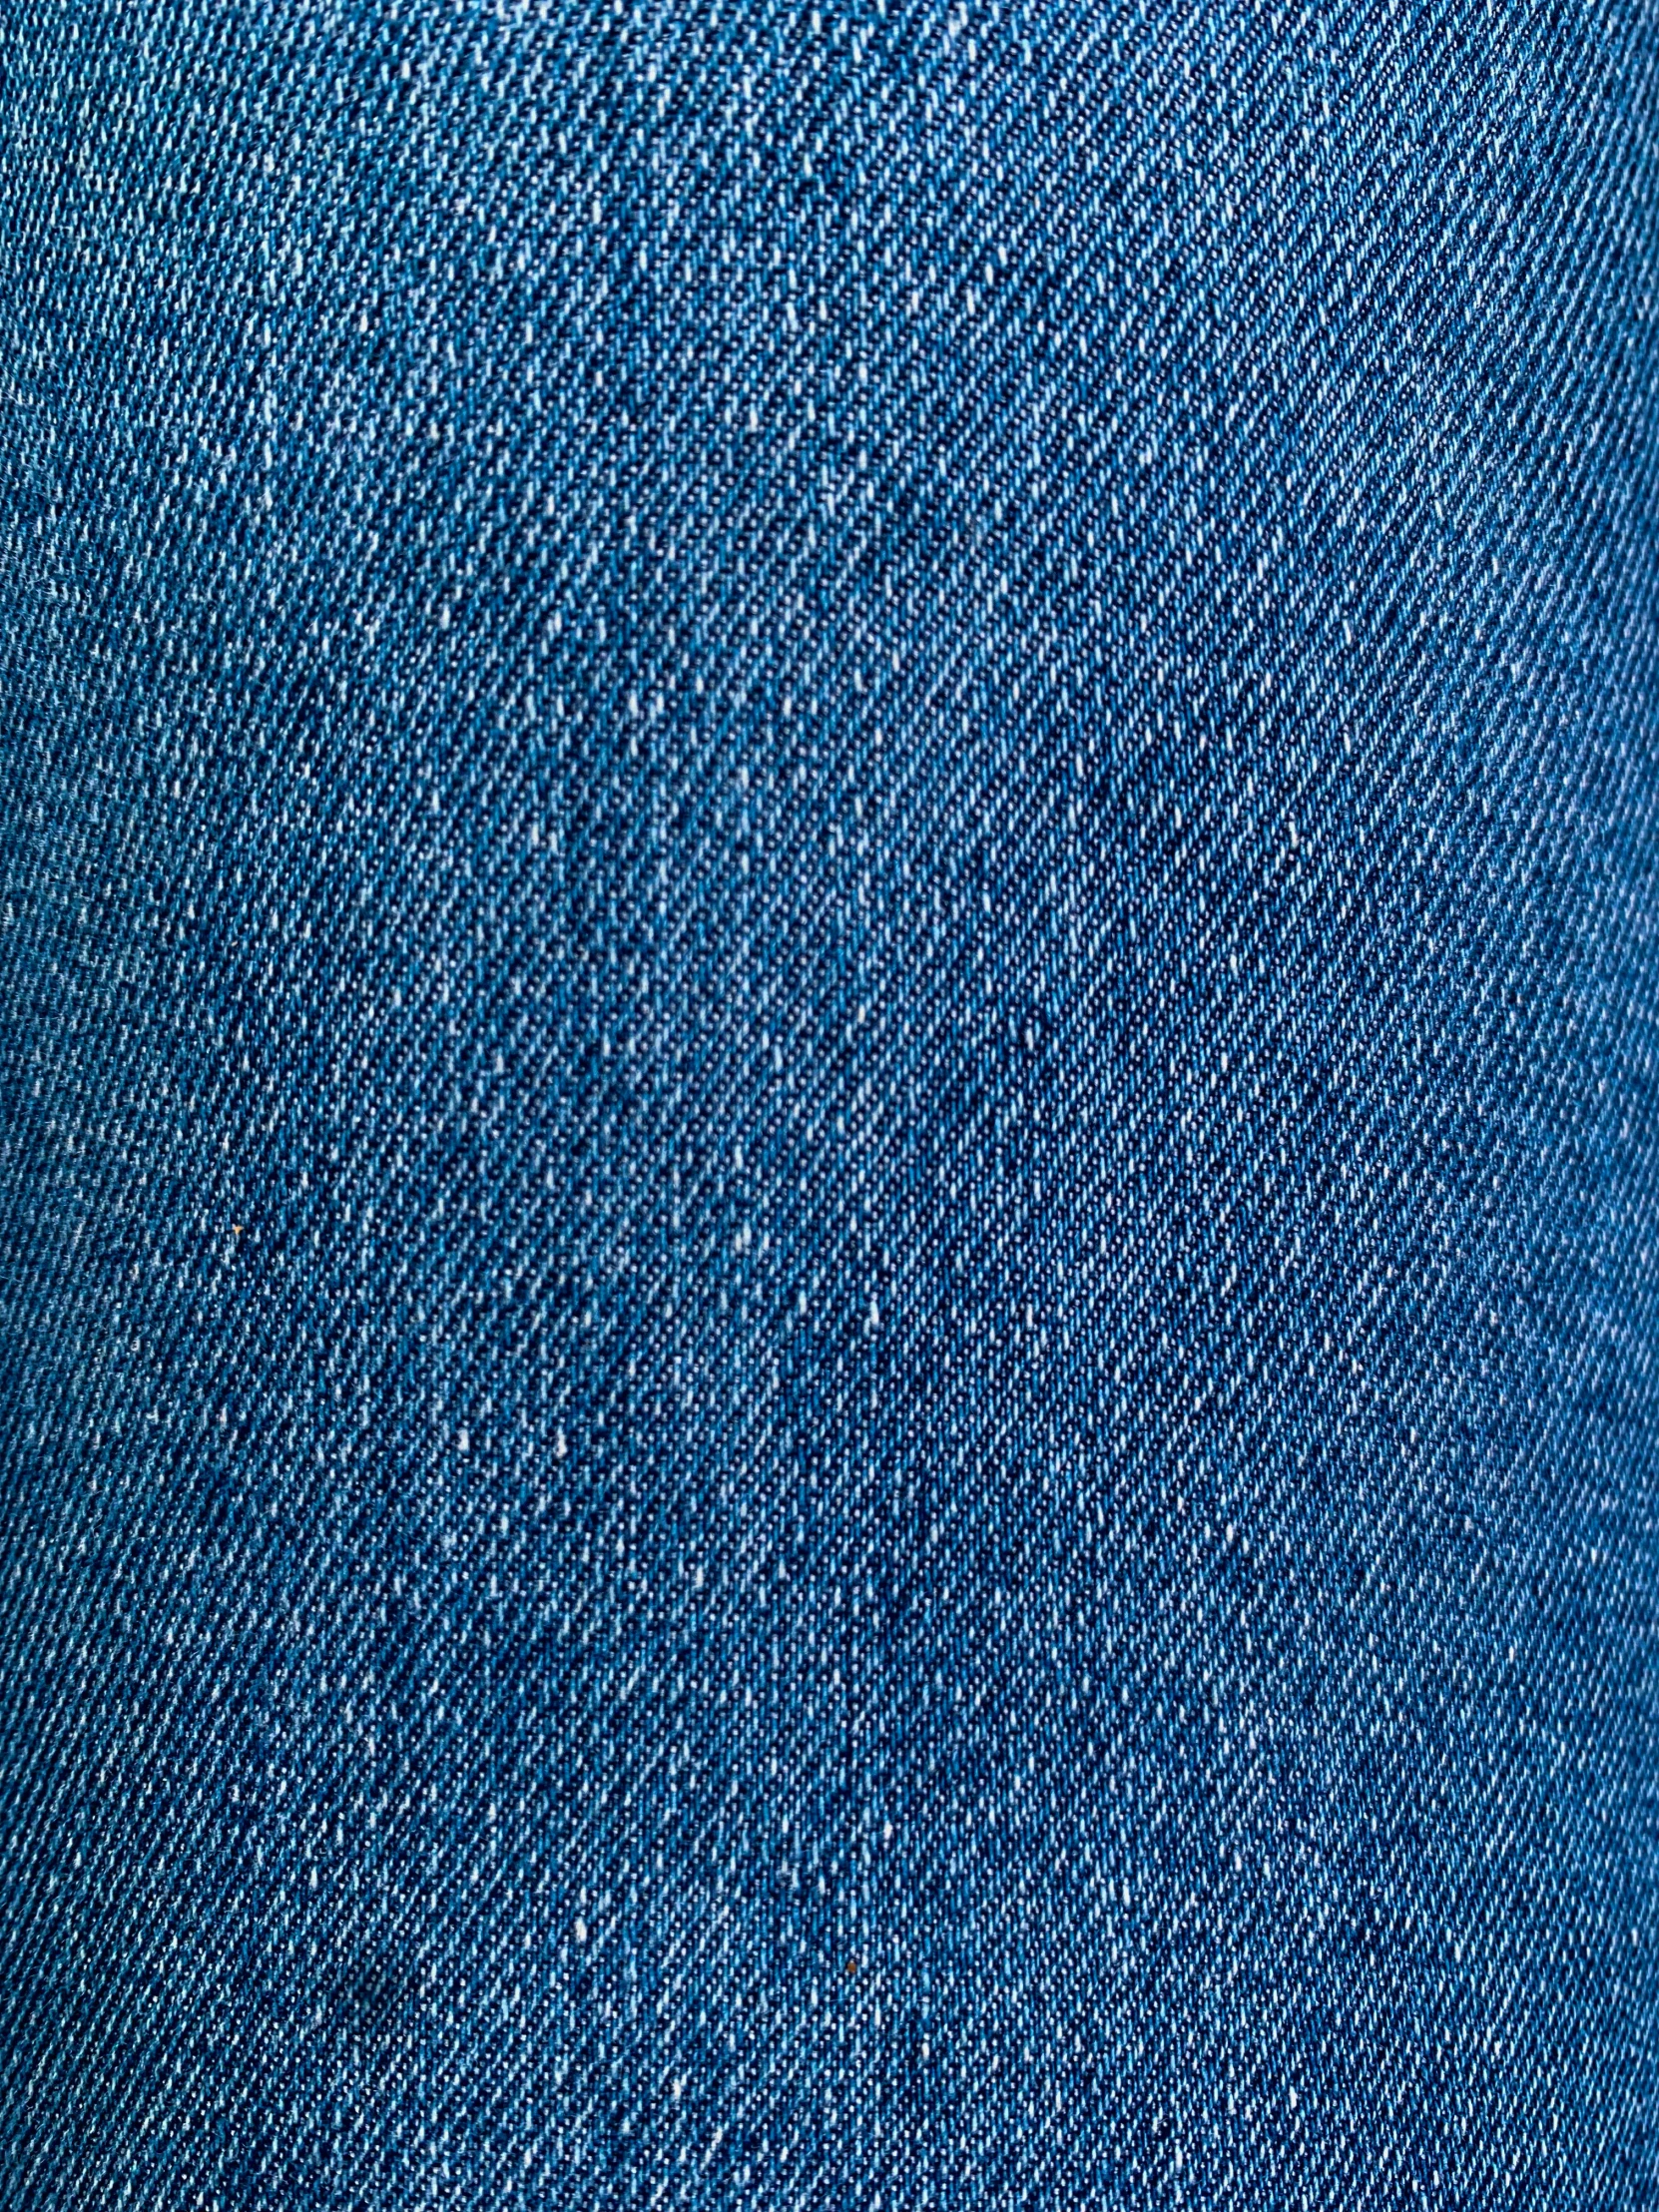 close up of blue jeans with a soft, light background